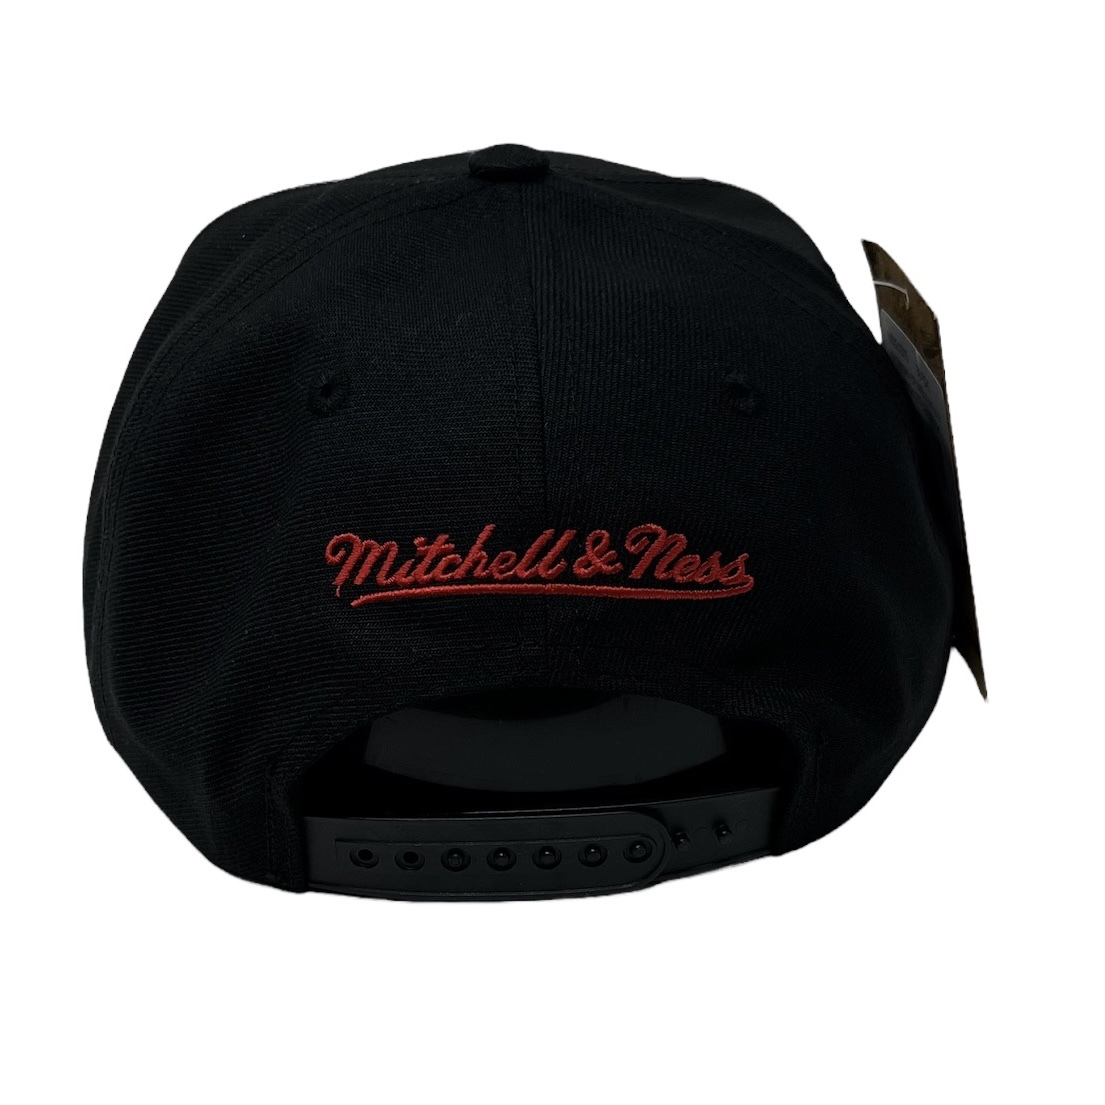 Chicago Bulls Snapback Cap by Mitchell & Ness --> Shop Hats, Beanies & Caps  online ▷ Hatshopping